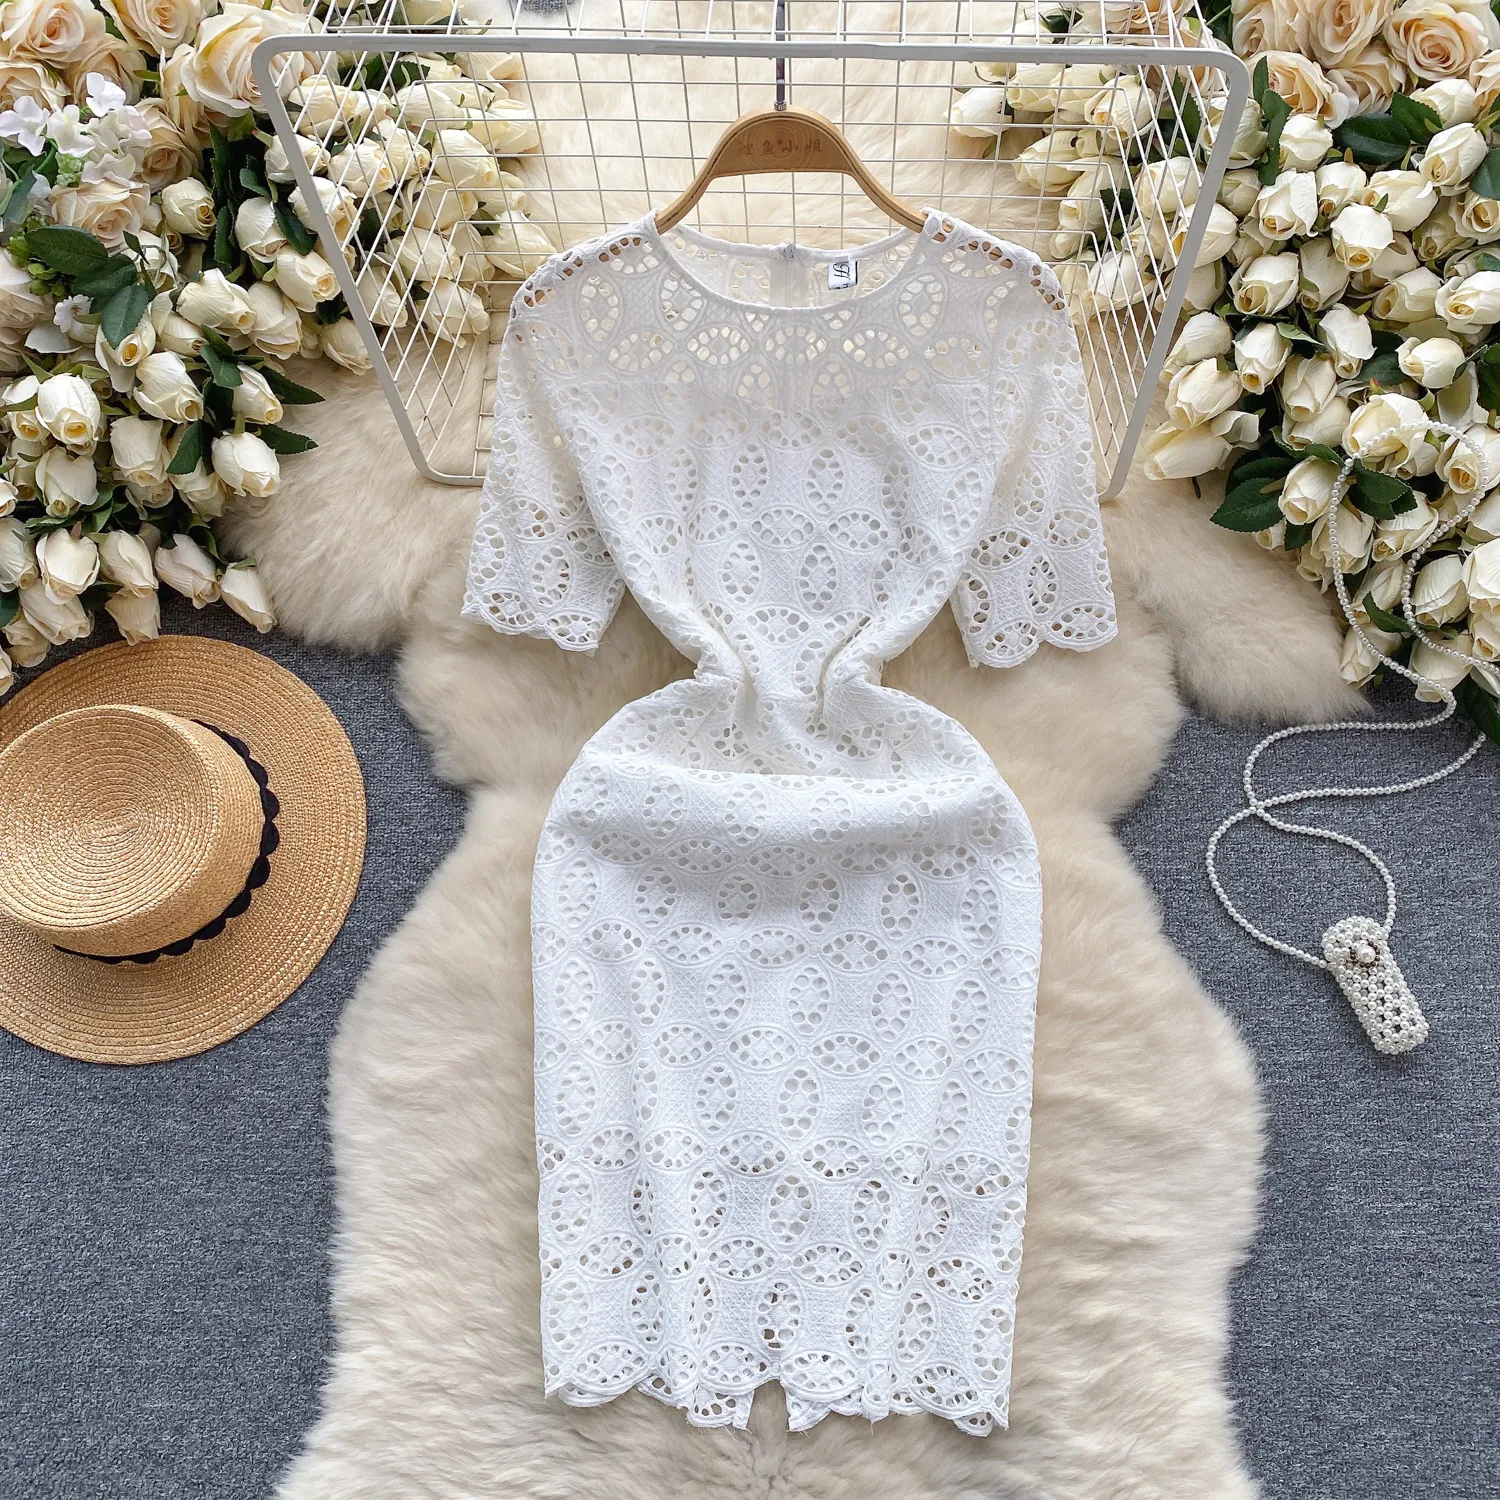 White dress, women's high-end temperament, lace hook flower hollowed out round neck, short sleeved slim fit, buttocks wrapped skirt, women's spring style